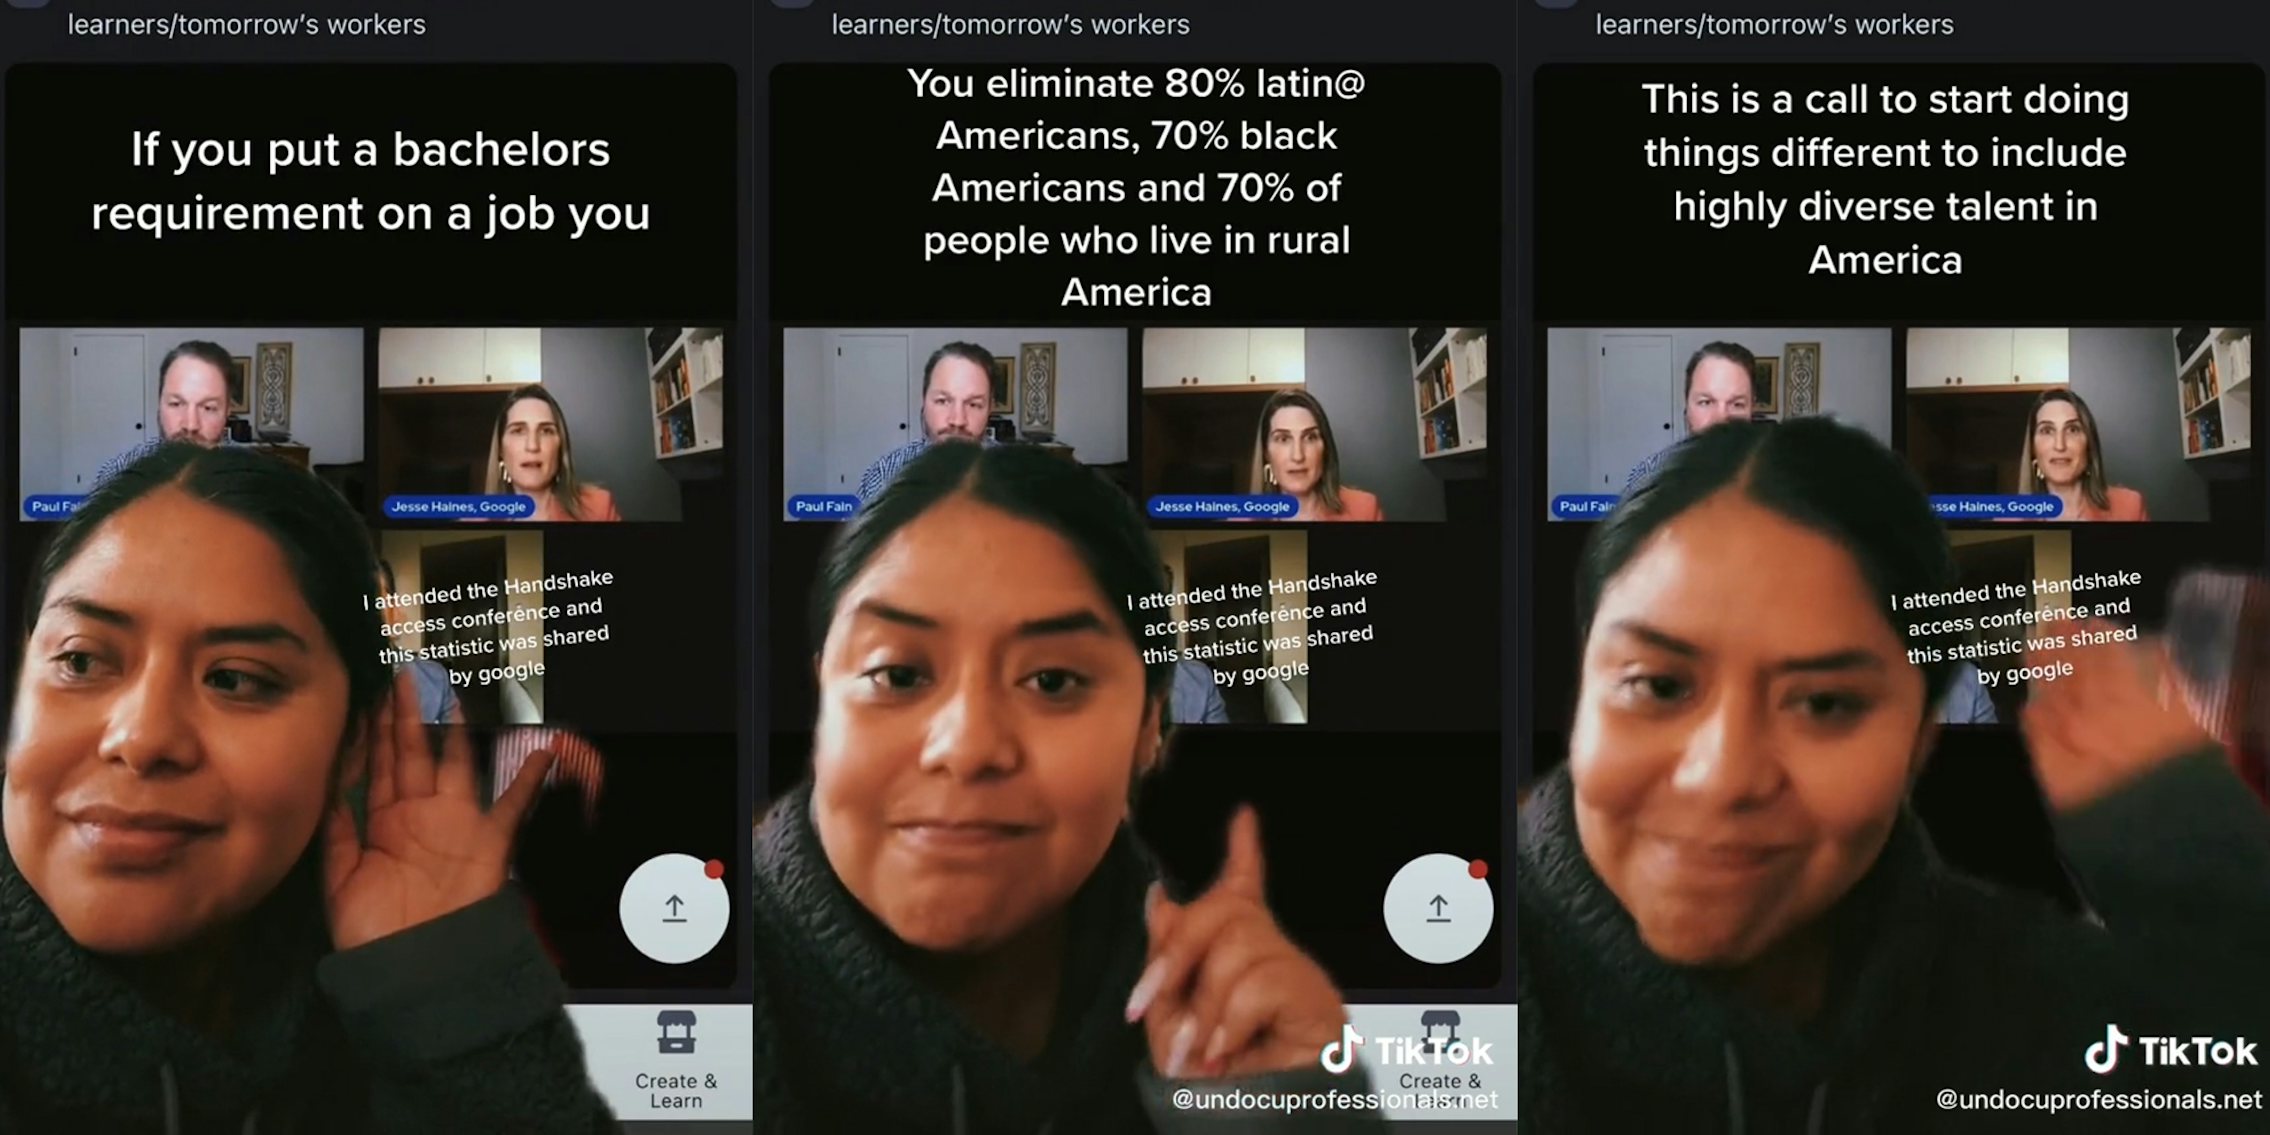 woman in front of conference call background with caption 'If you put a bachelors requirement on a job you eliminate 80% latin@ Americans, 70% black Americans and 70% of people who live in rural America'